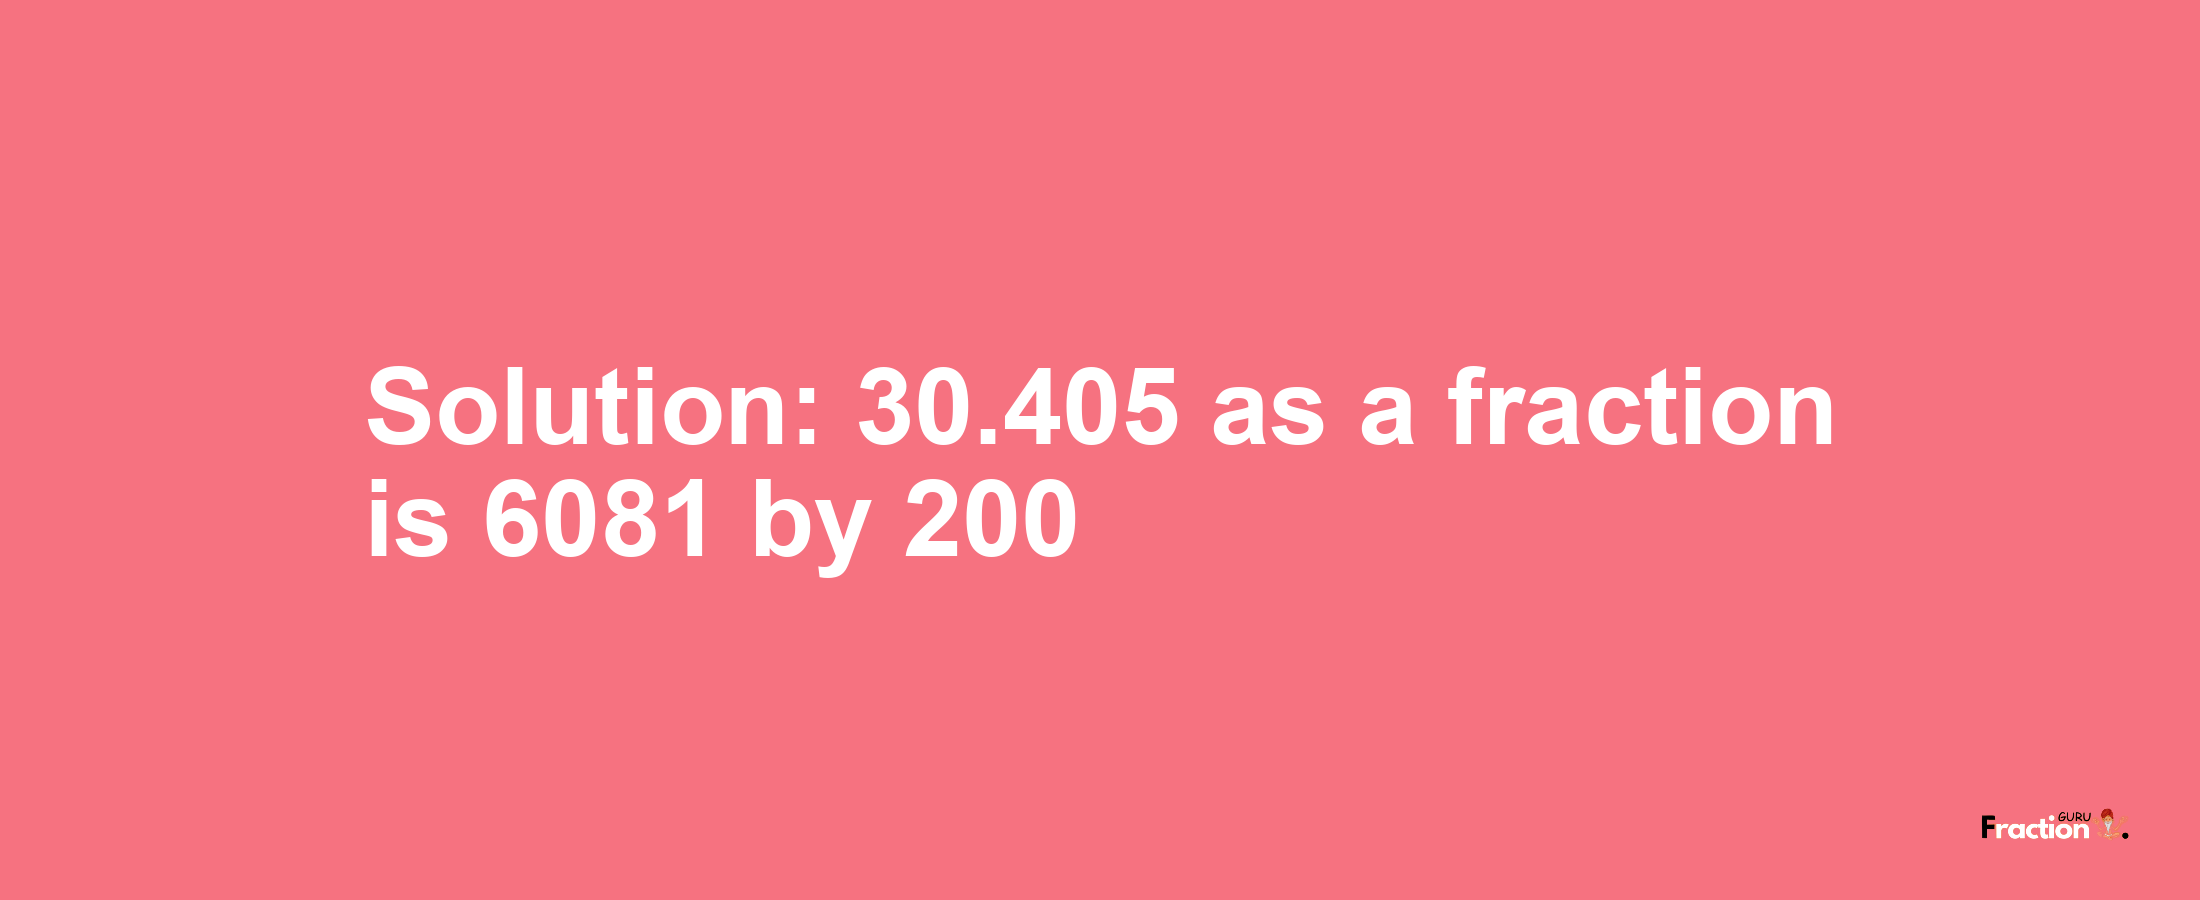 Solution:30.405 as a fraction is 6081/200